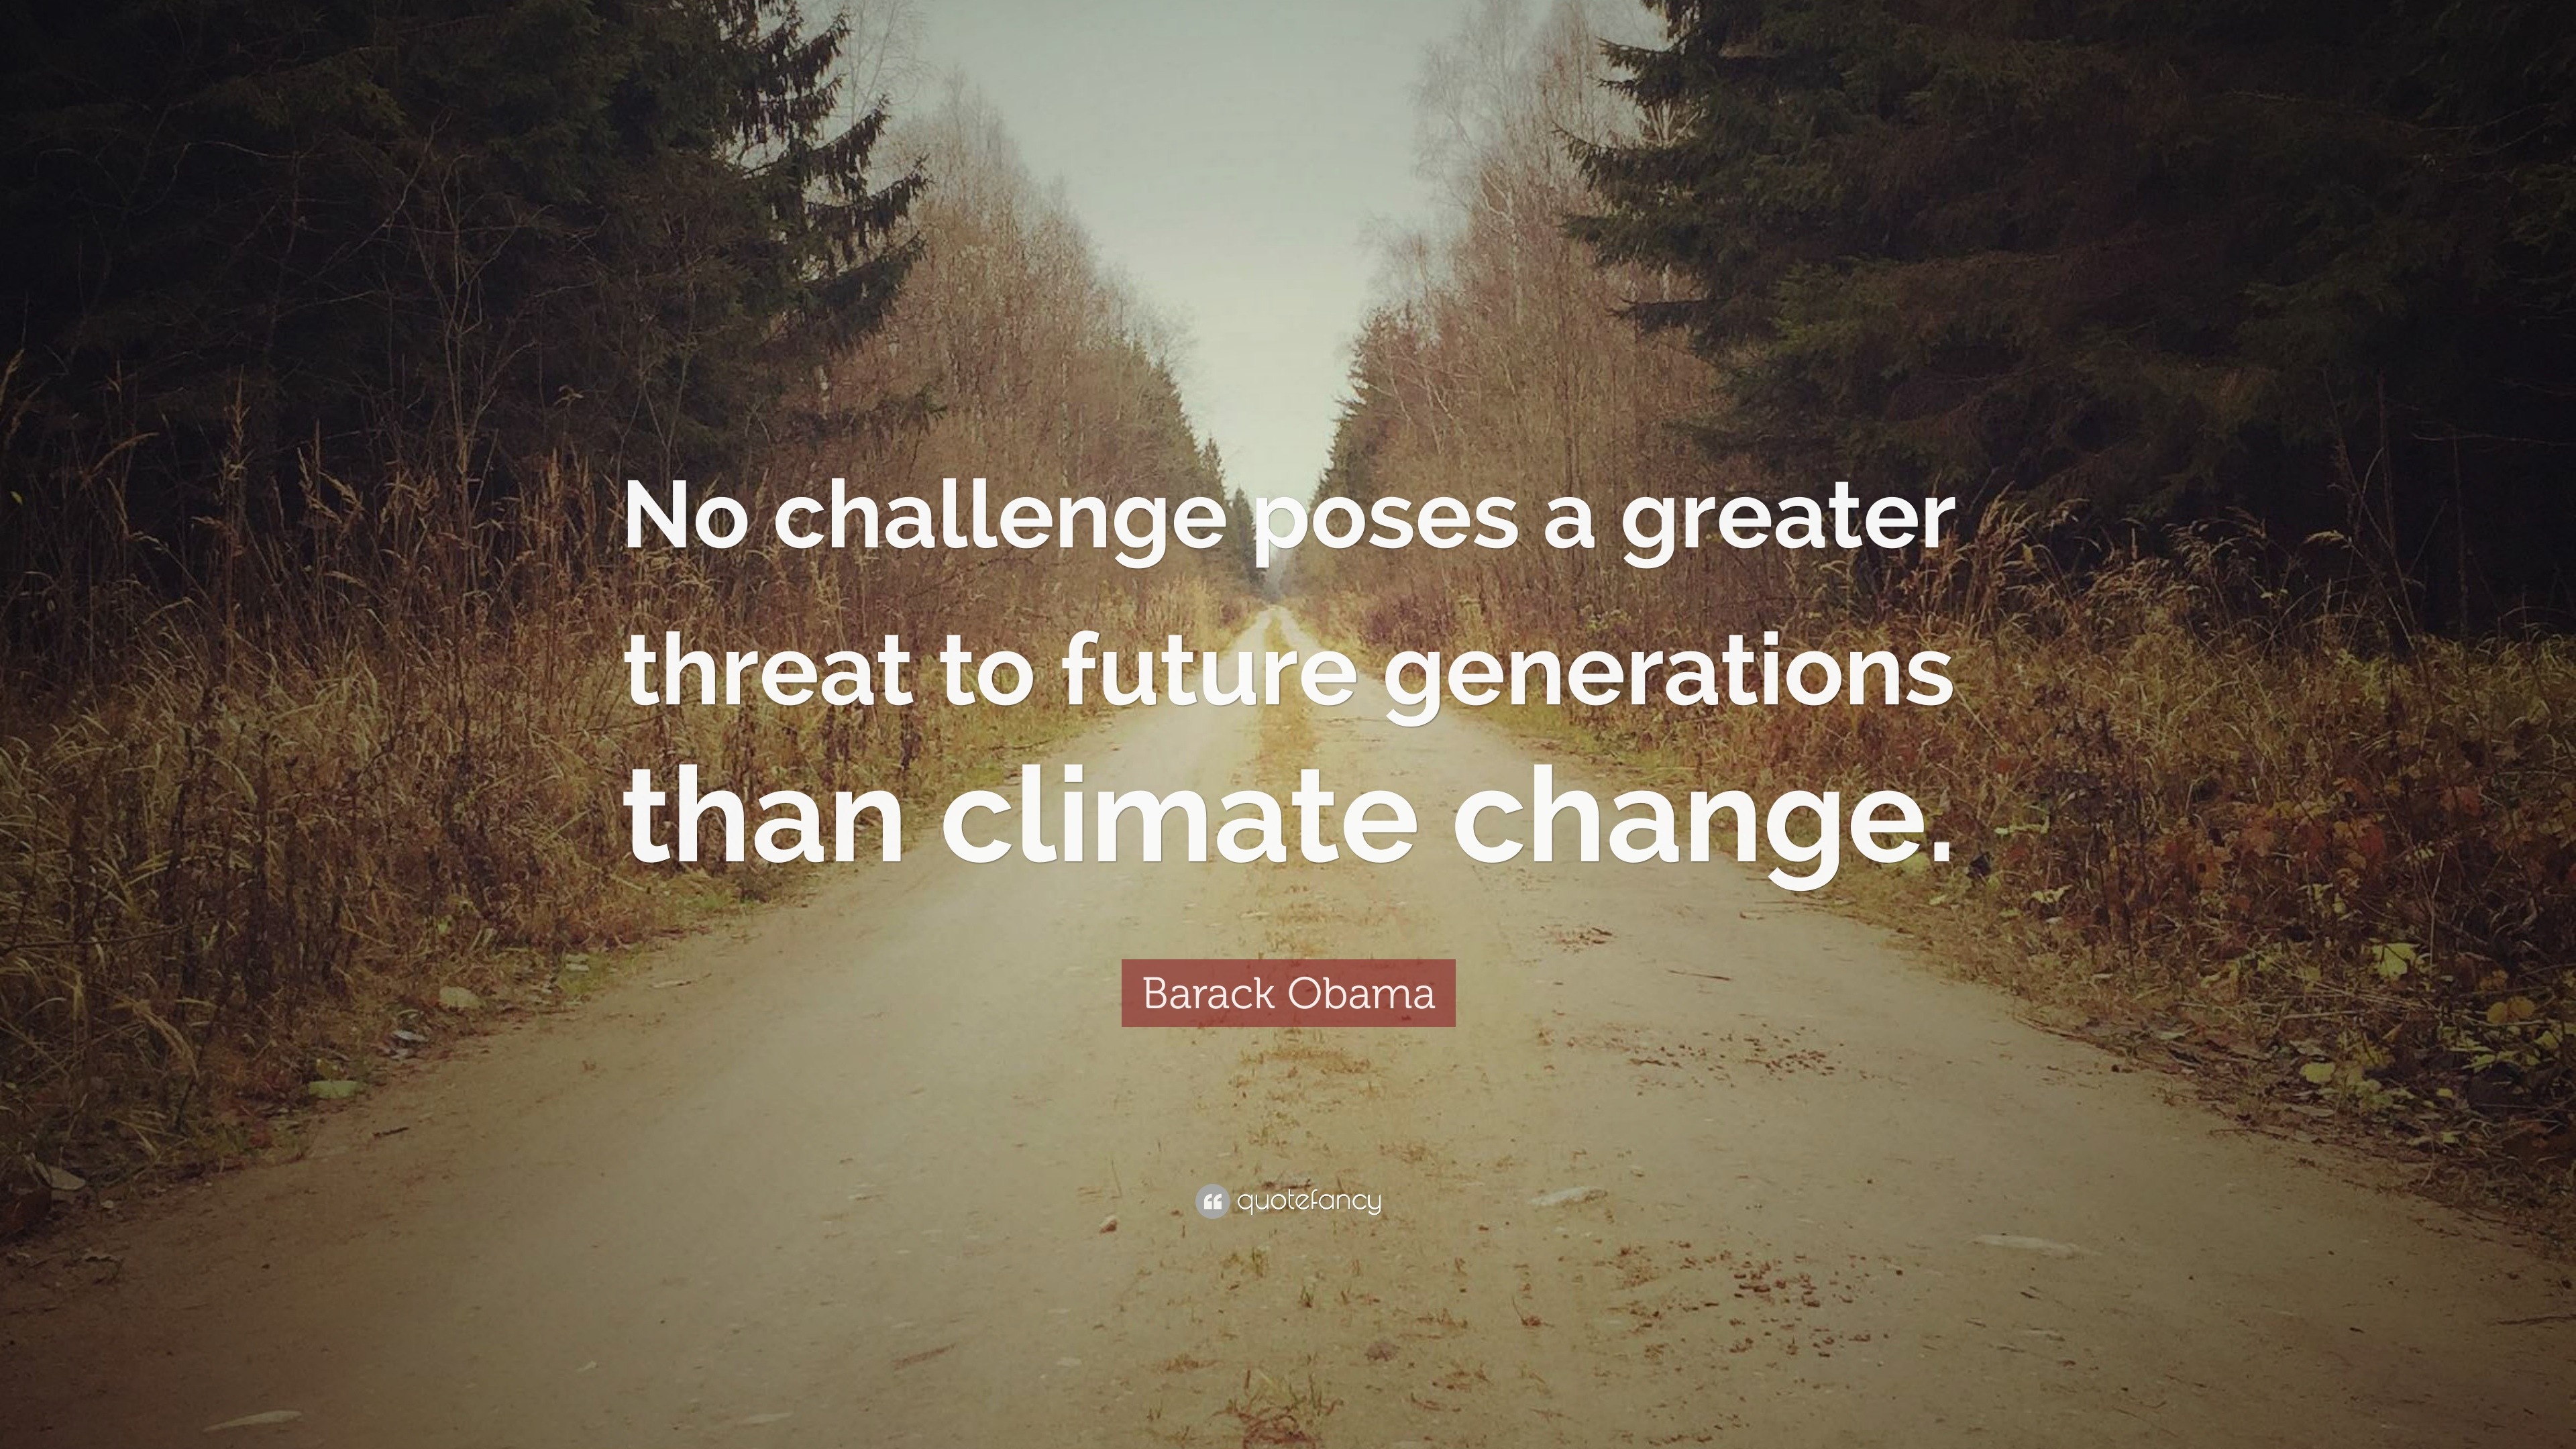 Barack Obama Quote: “No challenge poses a greater threat to future  generations than climate change.”